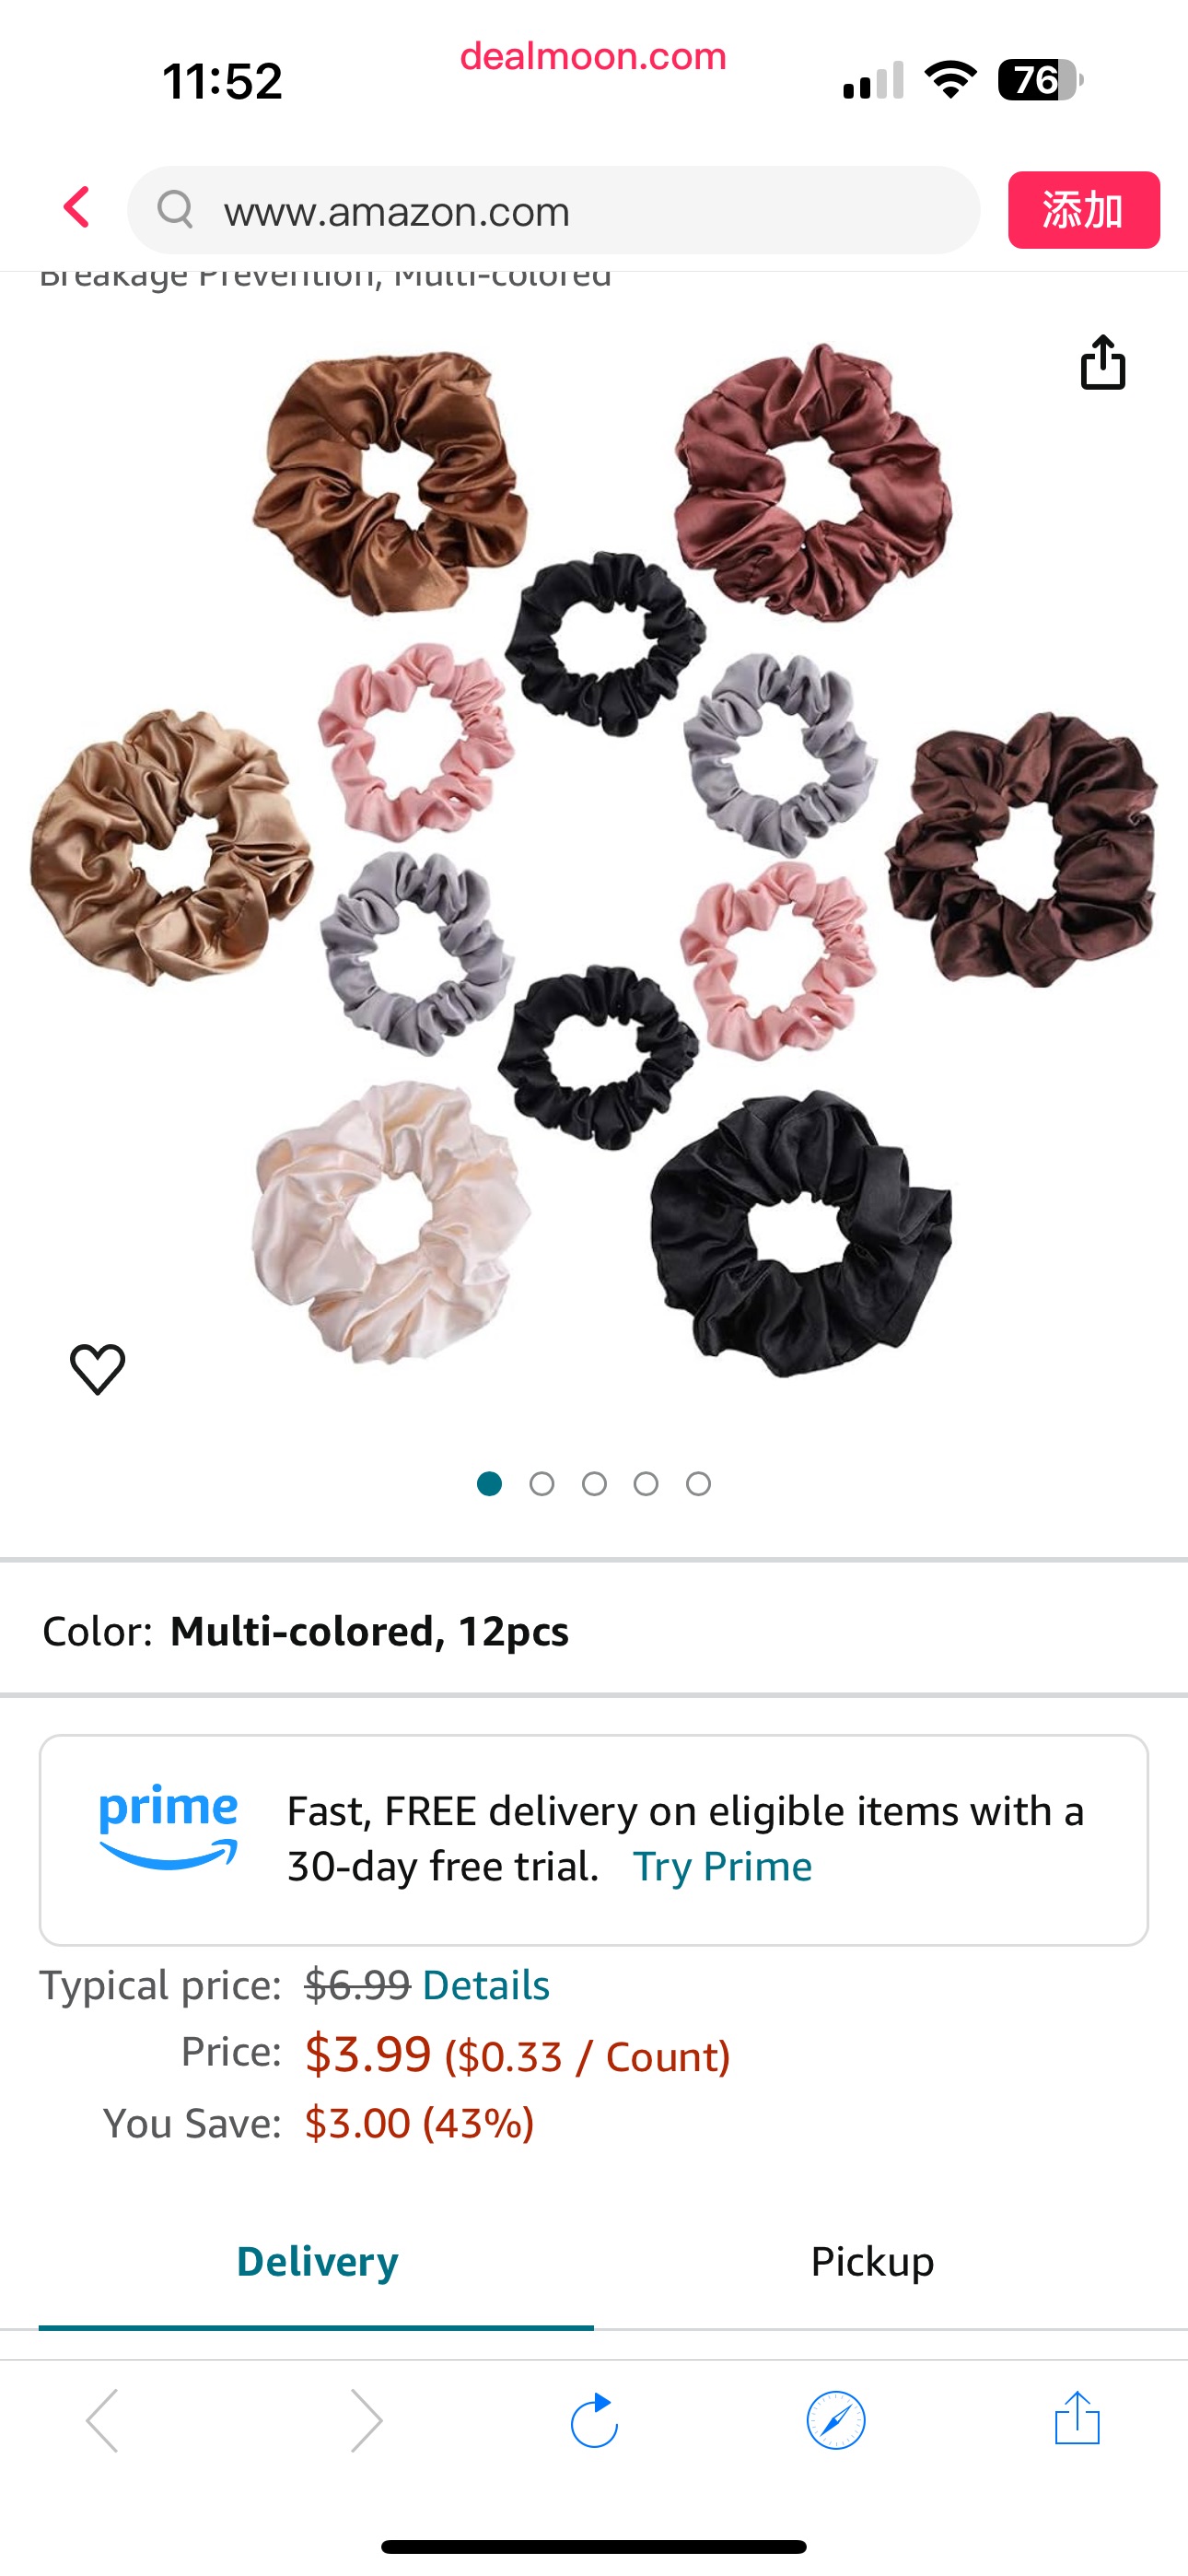 Amazon.com : Hair Scrunchies Set, 12Pcs Elegant Solid Elastic Ponytail Holder for Women and Girls, Satin Hair Ties for Gentle Style Preservation and Breakage Prevention, Multi-colored : 缎面大肠圈12个Beauty